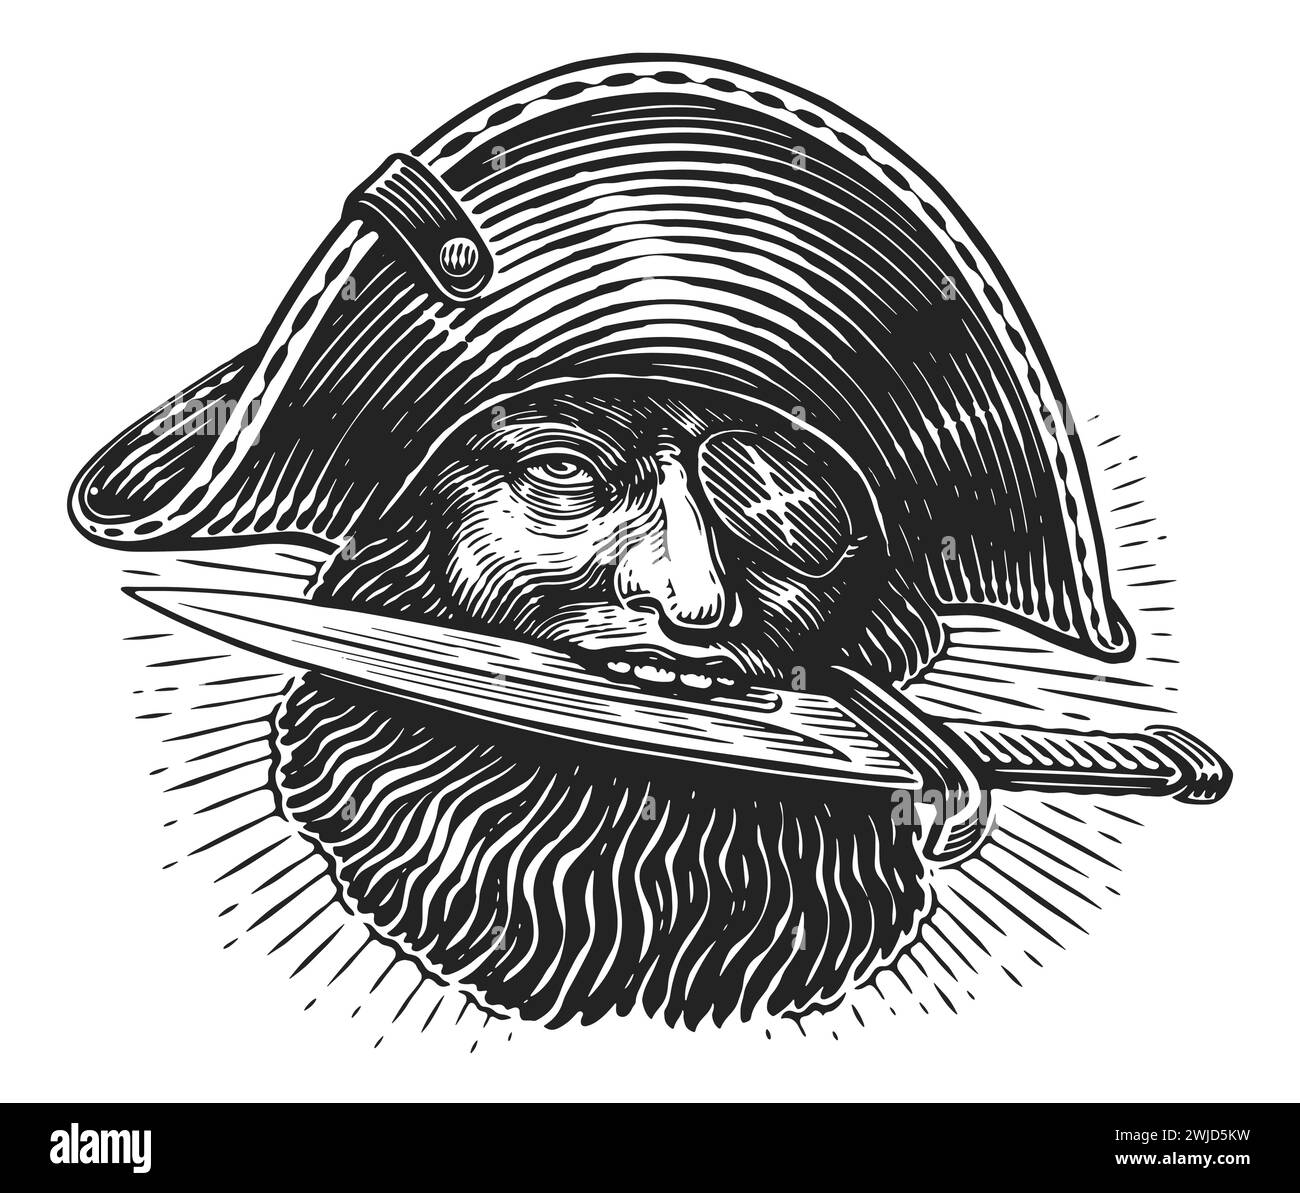 Pirate clip art Cut Out Stock Images & Pictures - Page 2 - Alamy